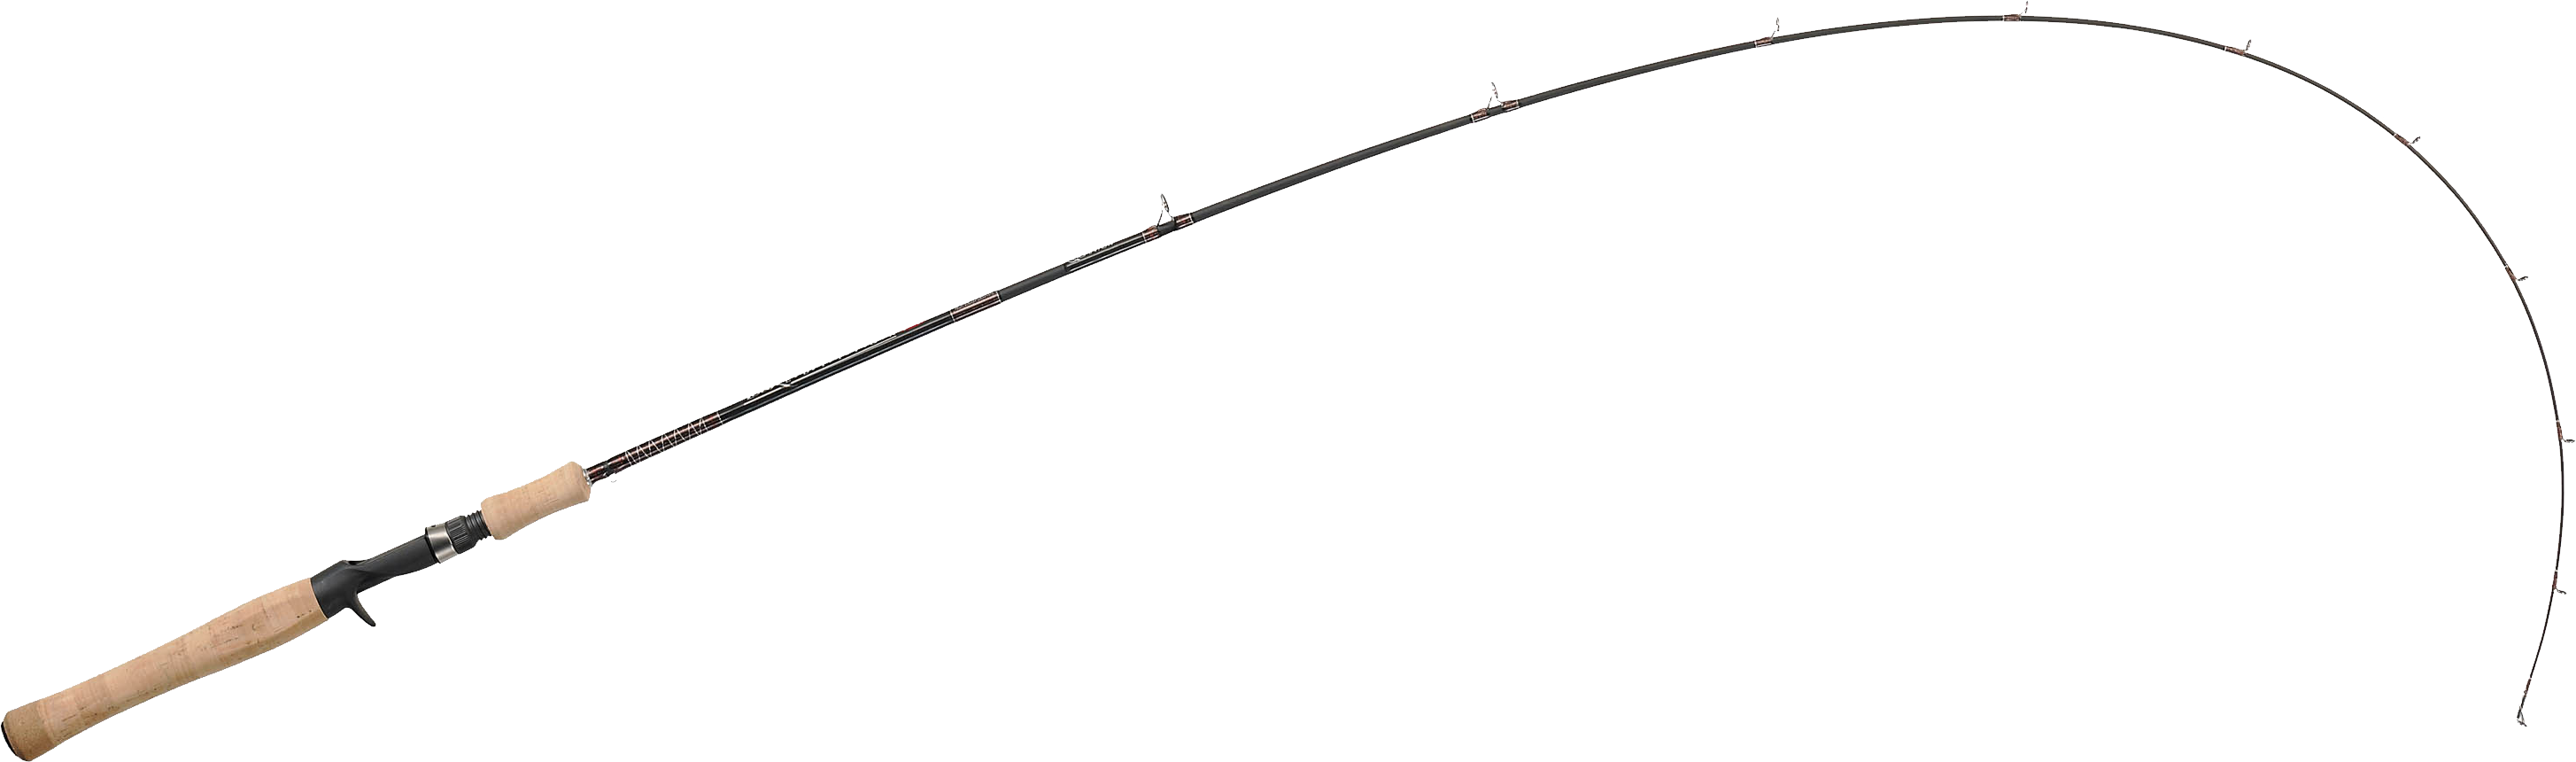 Real Bamboo Fishing Pole Free Transparent Image HQ PNG Image